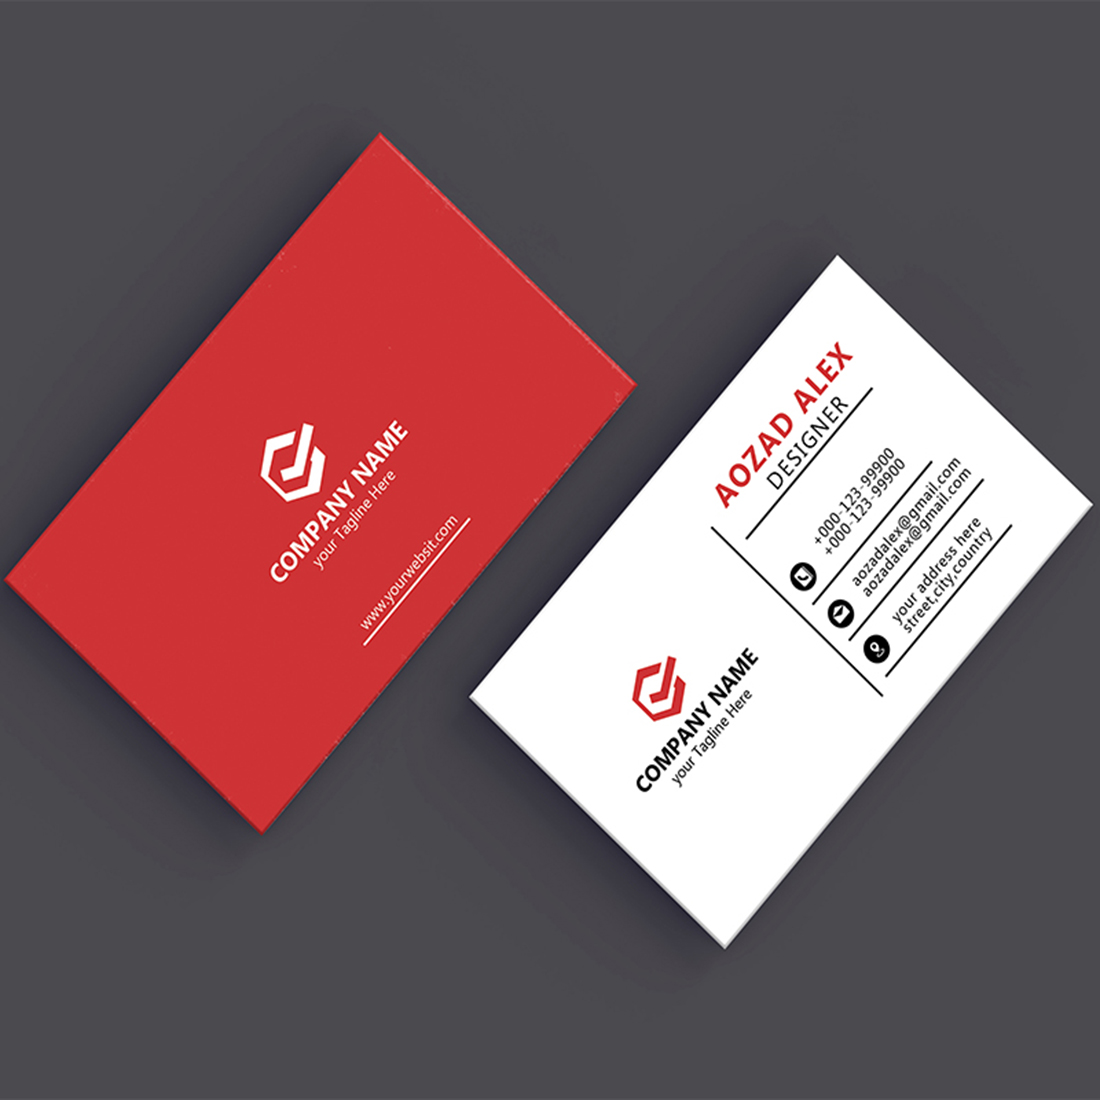 Modern Business Cared Design template 3 item included cover image.